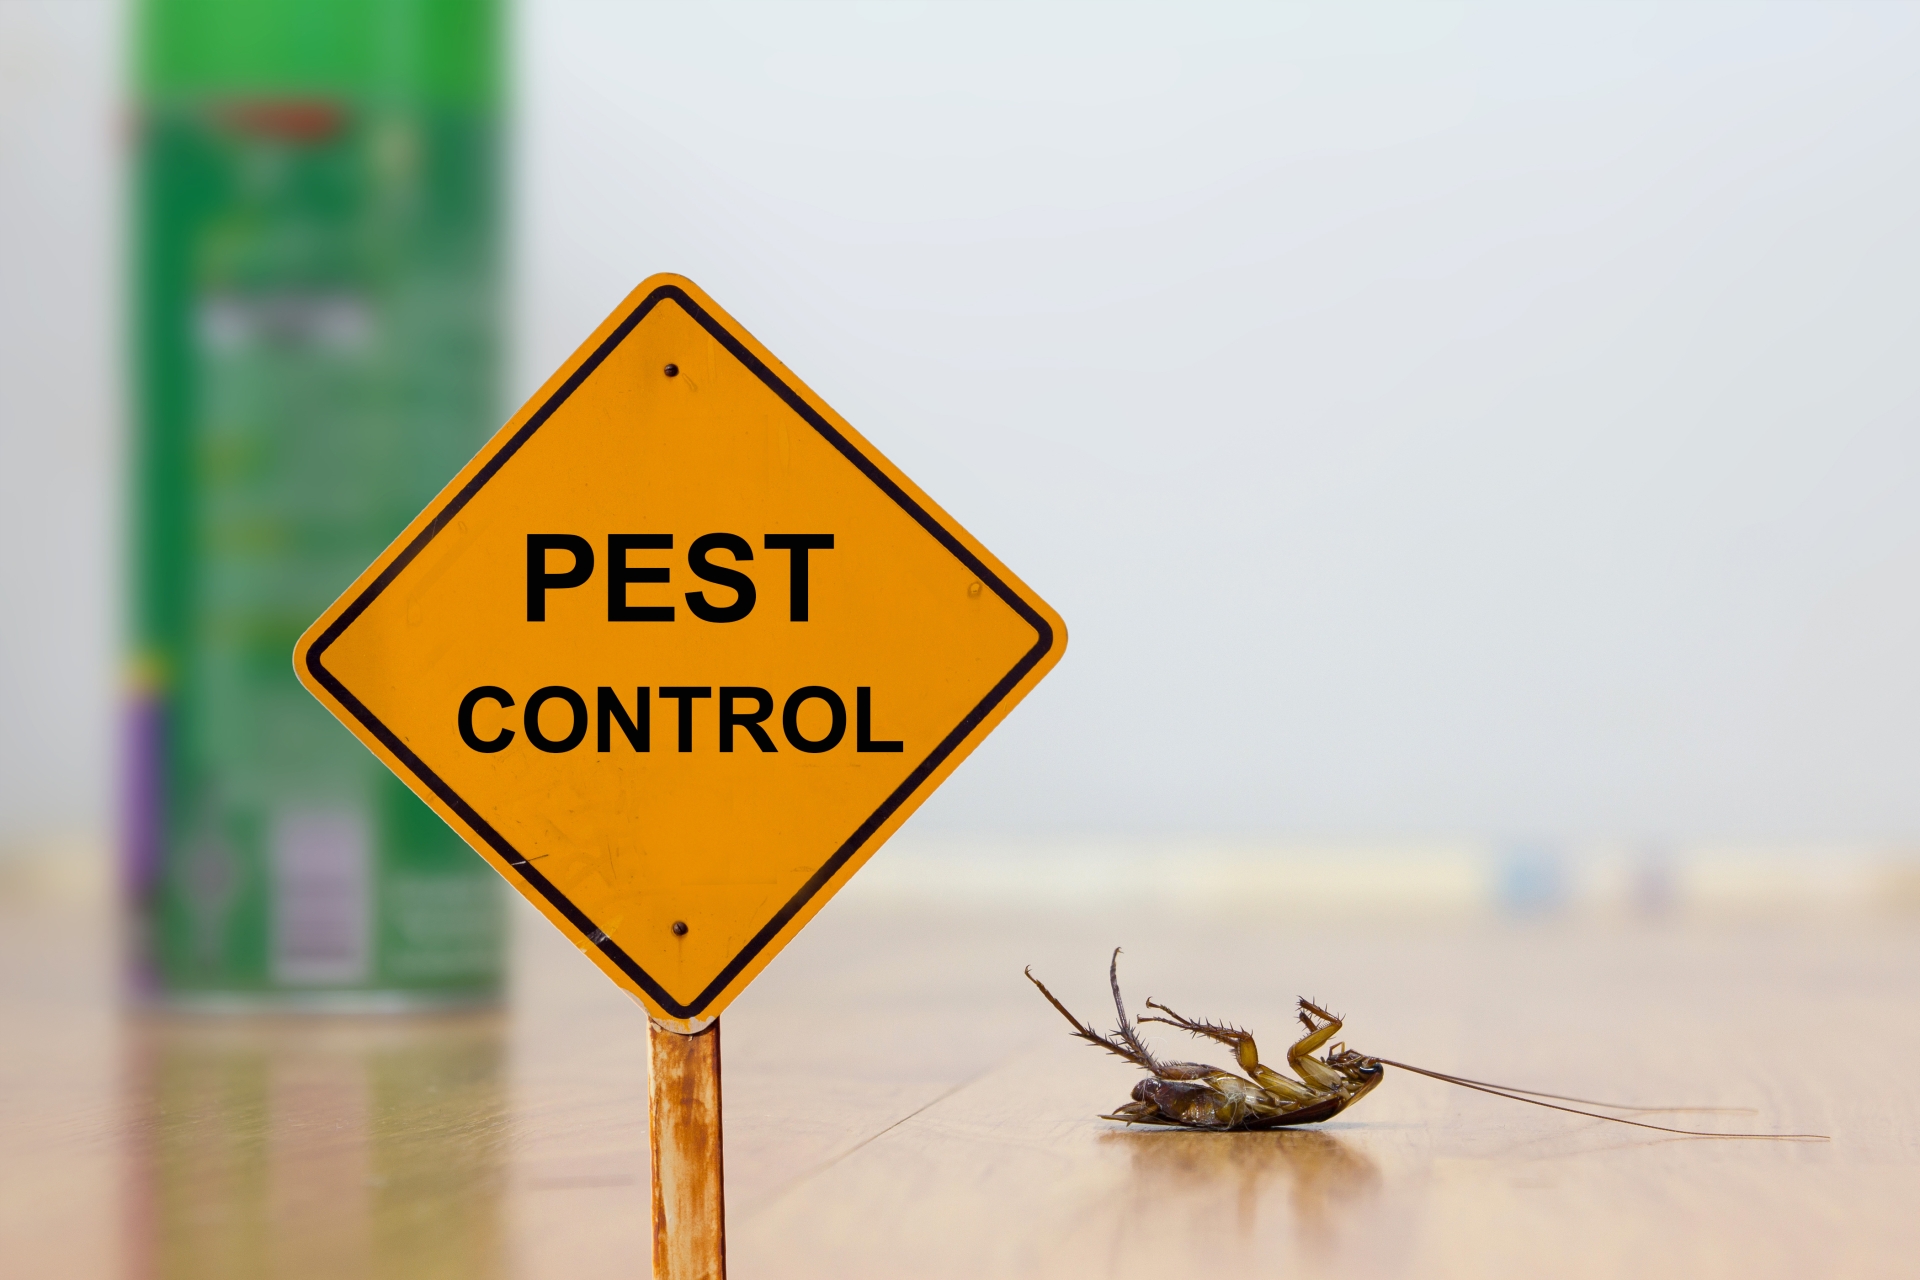 24 Hour Pest Control, Pest Control in Kentish Town, NW5. Call Now 020 8166 9746